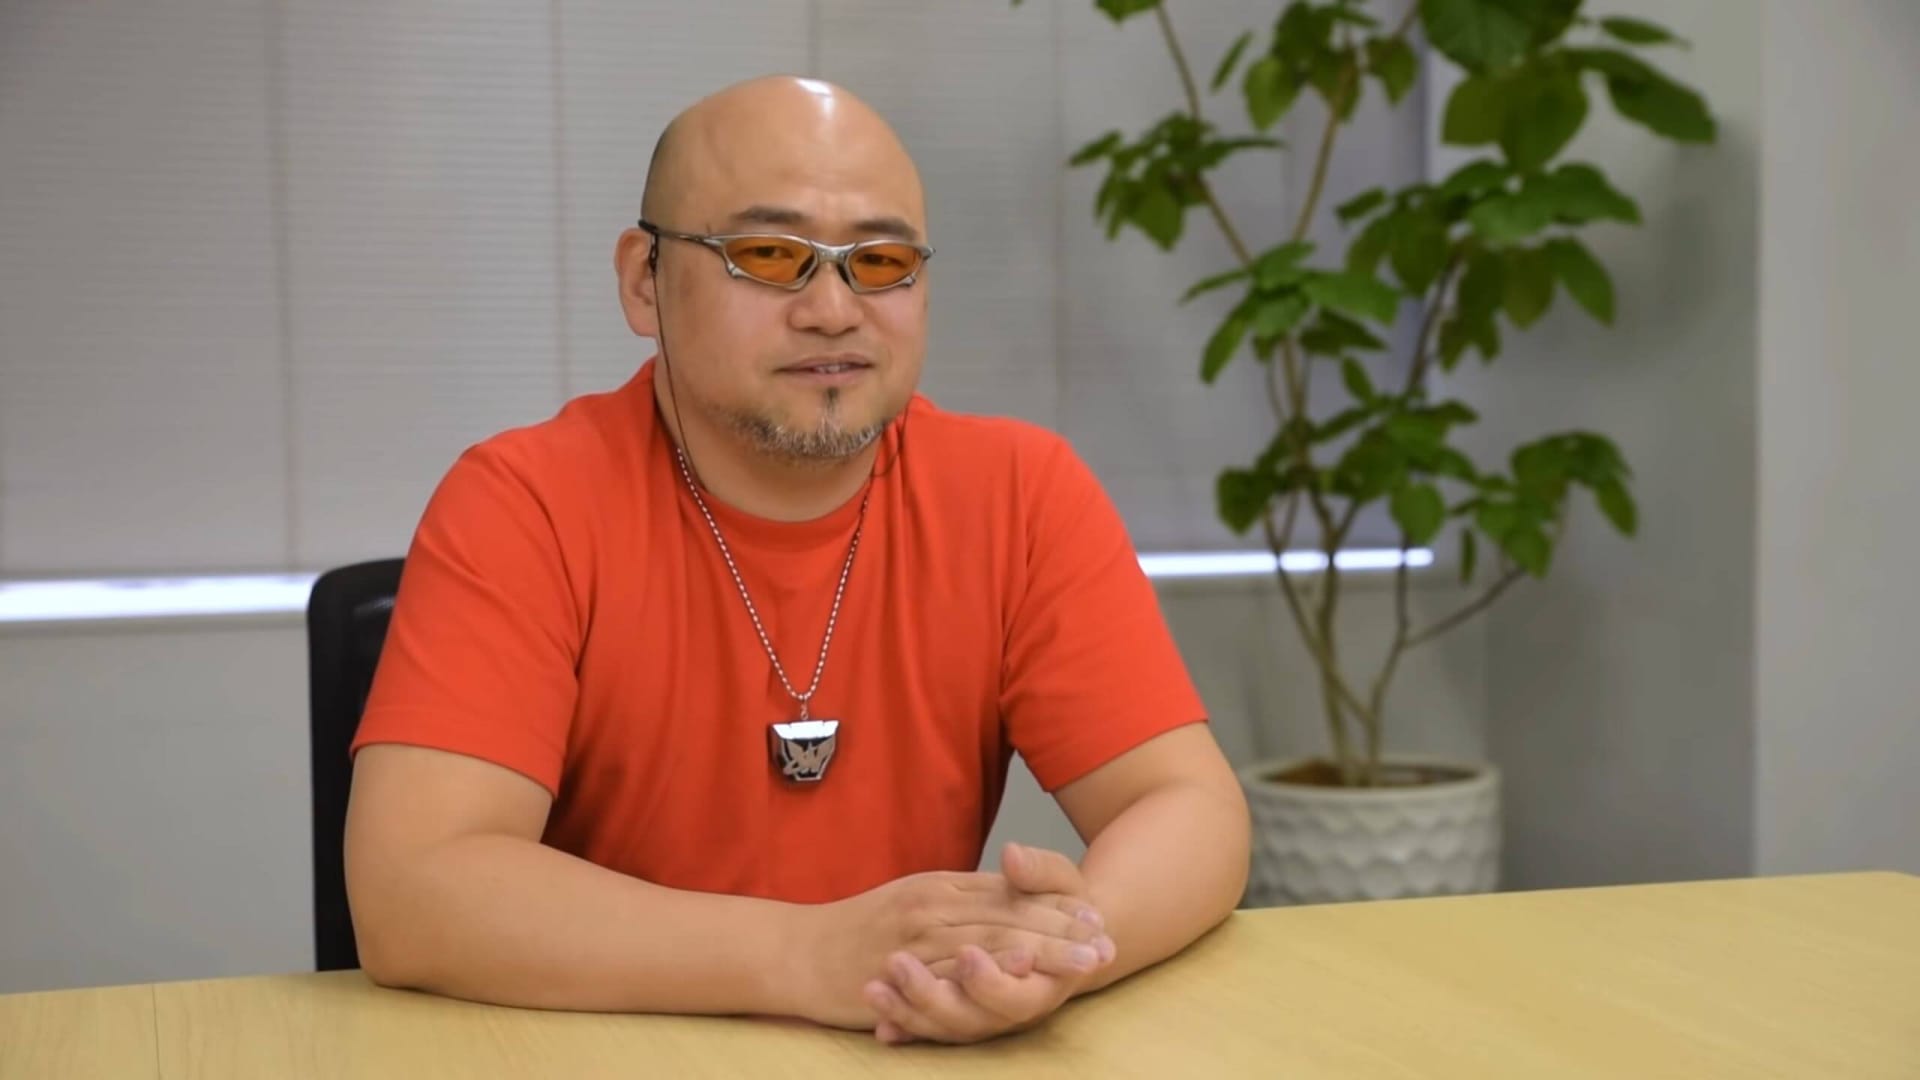 Hideki Kamiya smiling at the camera in an interview about PlatinumGames title The Wonderful 101